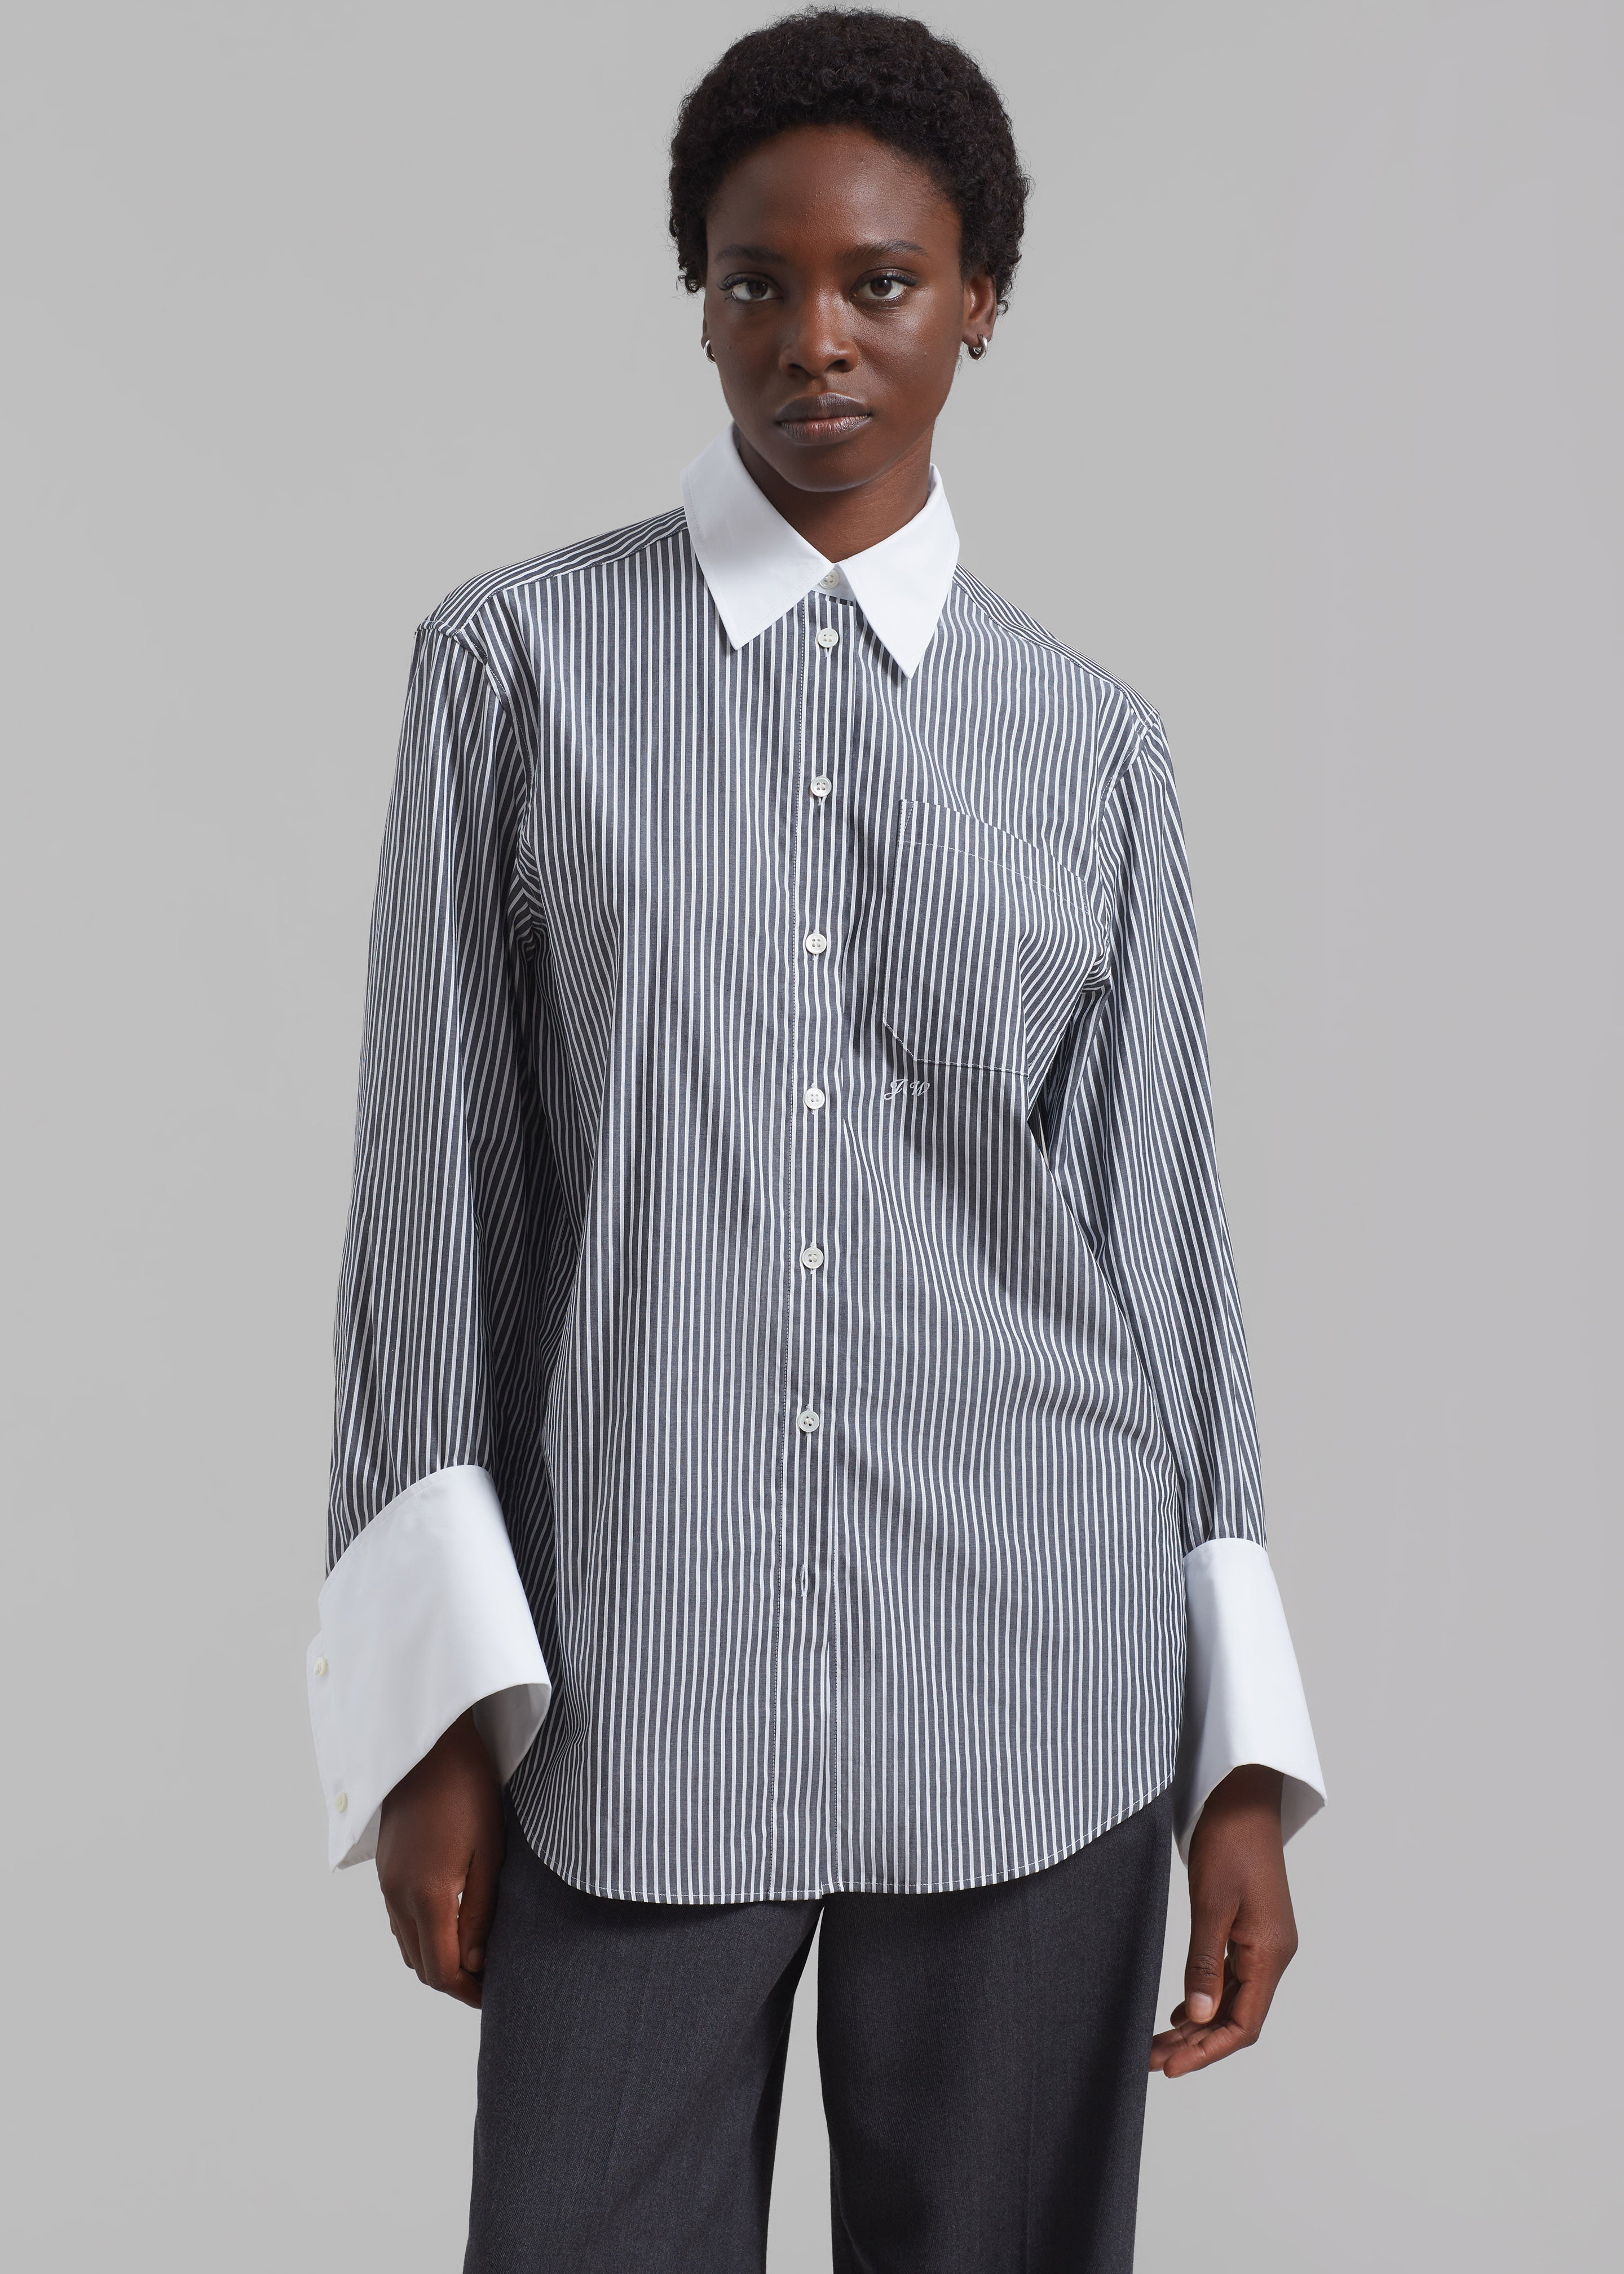 JW Anderson Oversized Cuff Shirt - Charcoal/White - 2